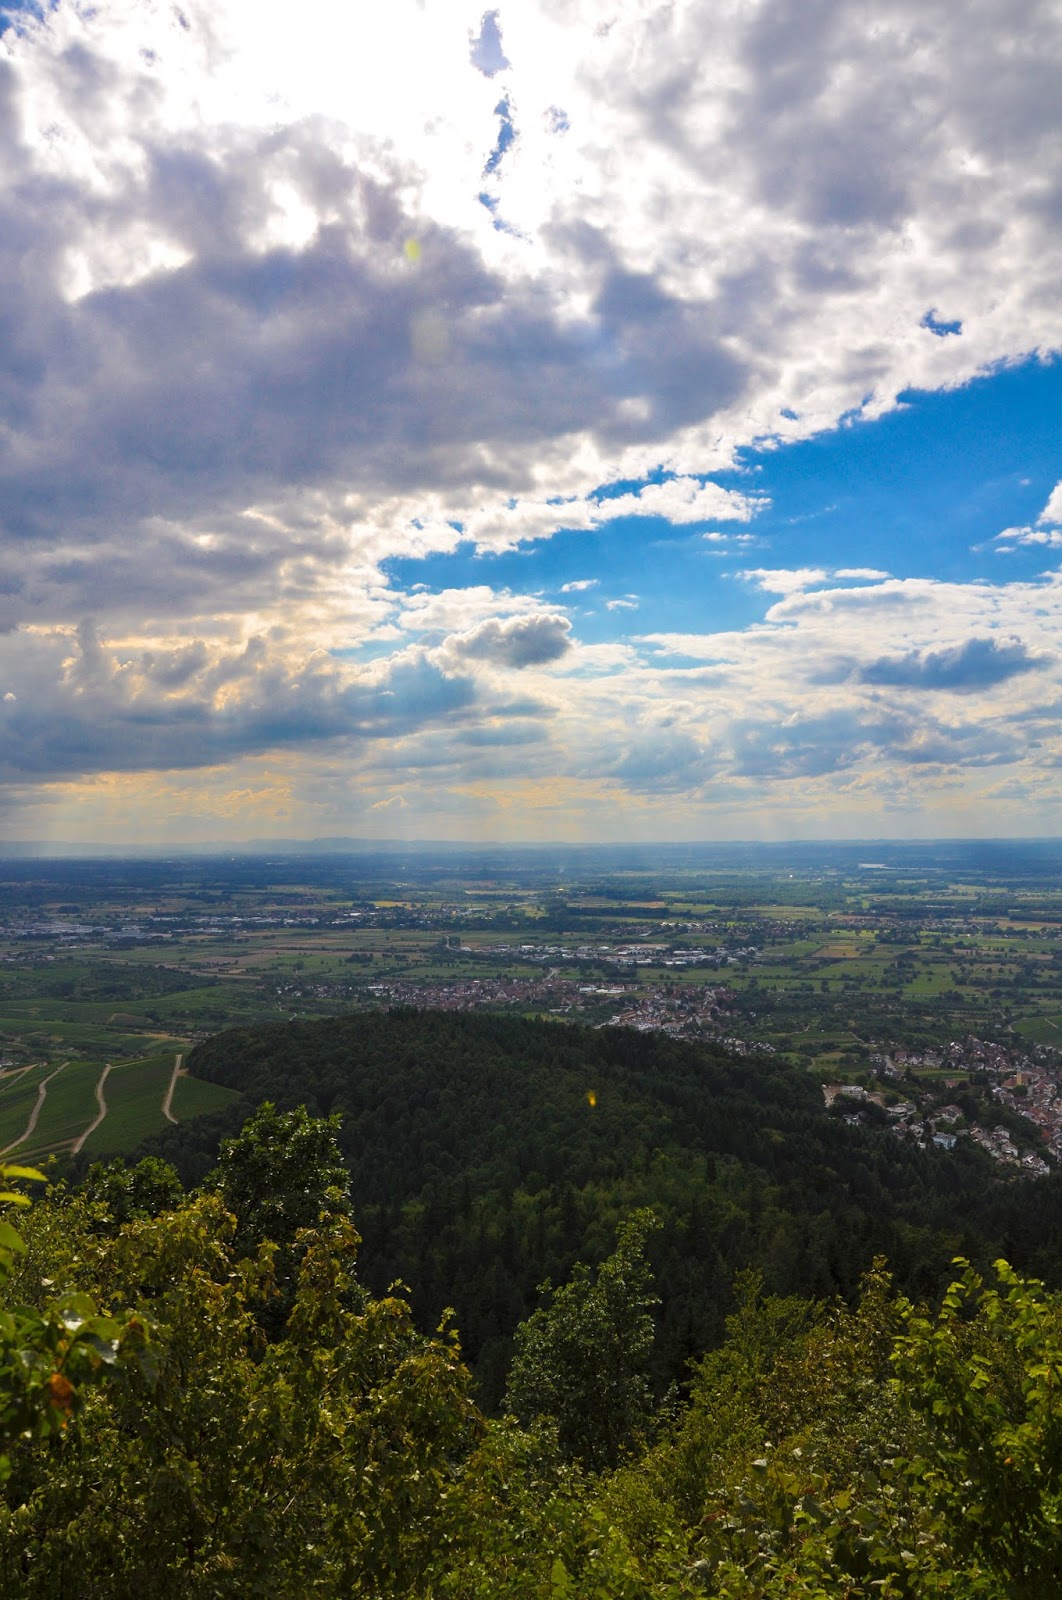 The Rhine Valley seen from the Yburg Castle, Germany